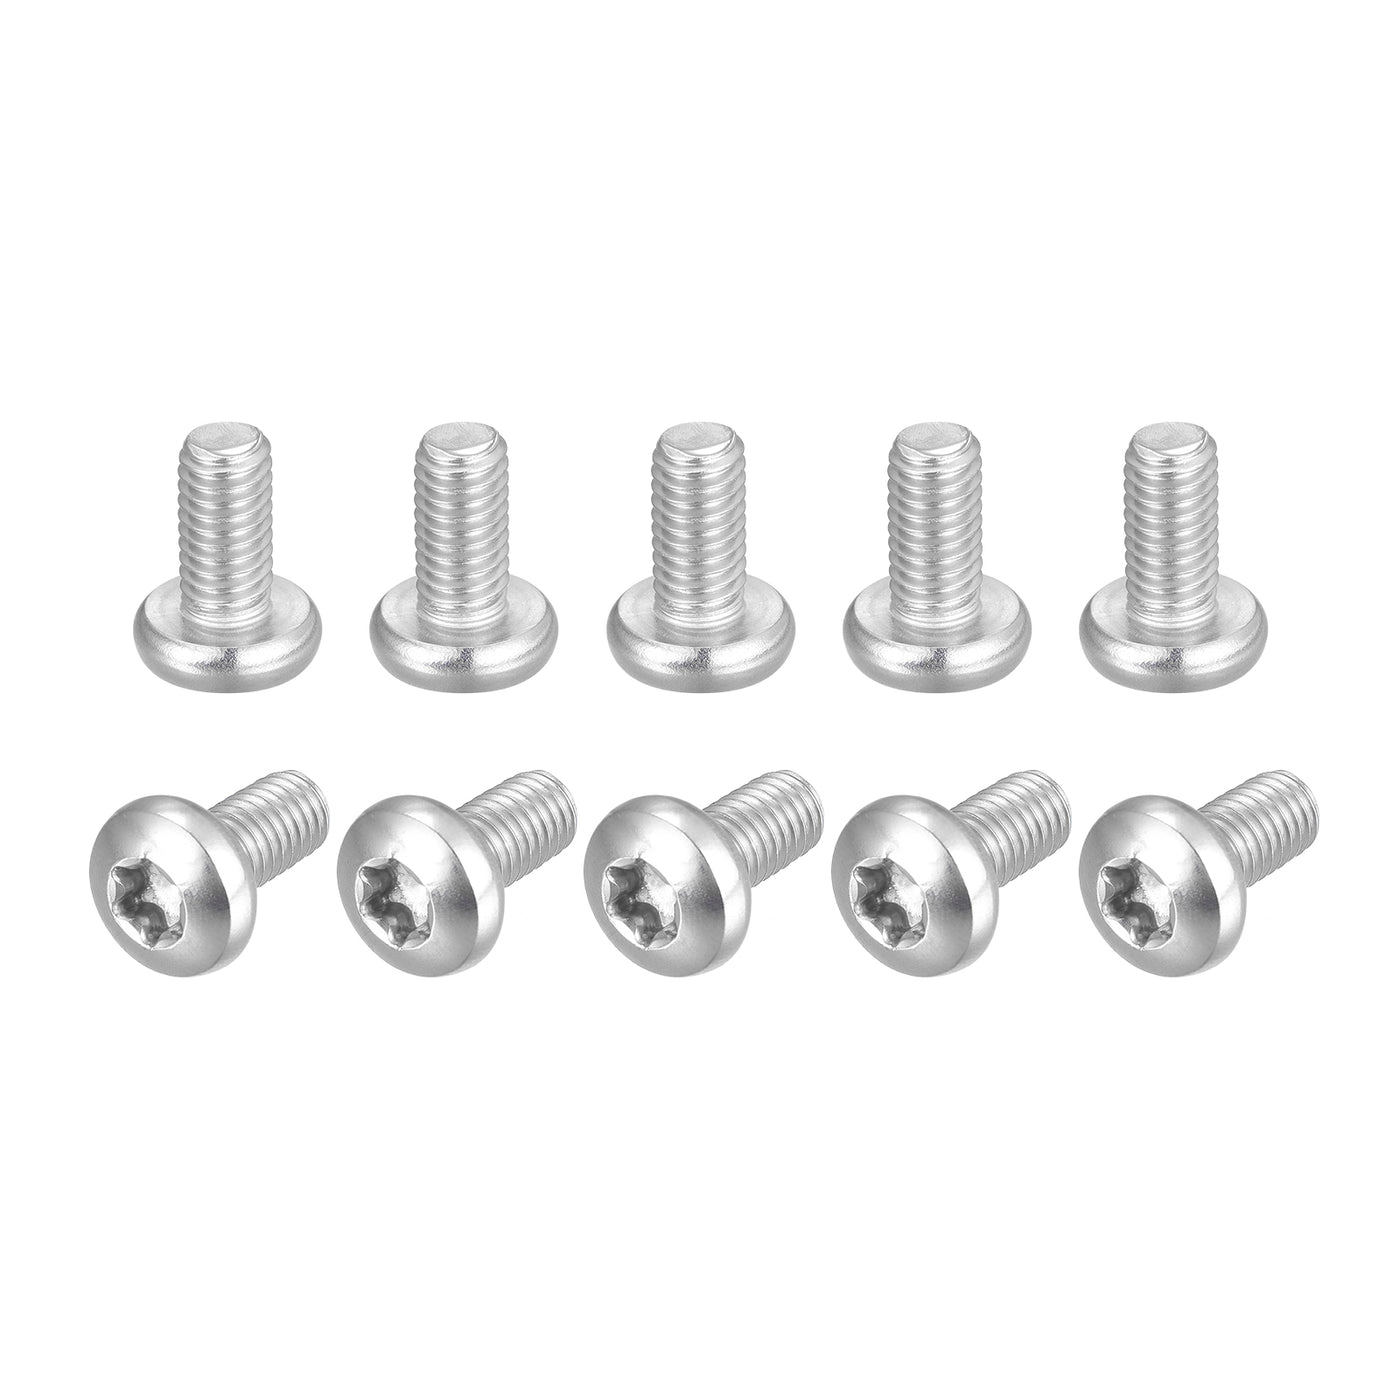 uxcell Uxcell M6x12mm Torx Security Machine Screws, 20pcs 316 Stainless Steel Pan Head Screw